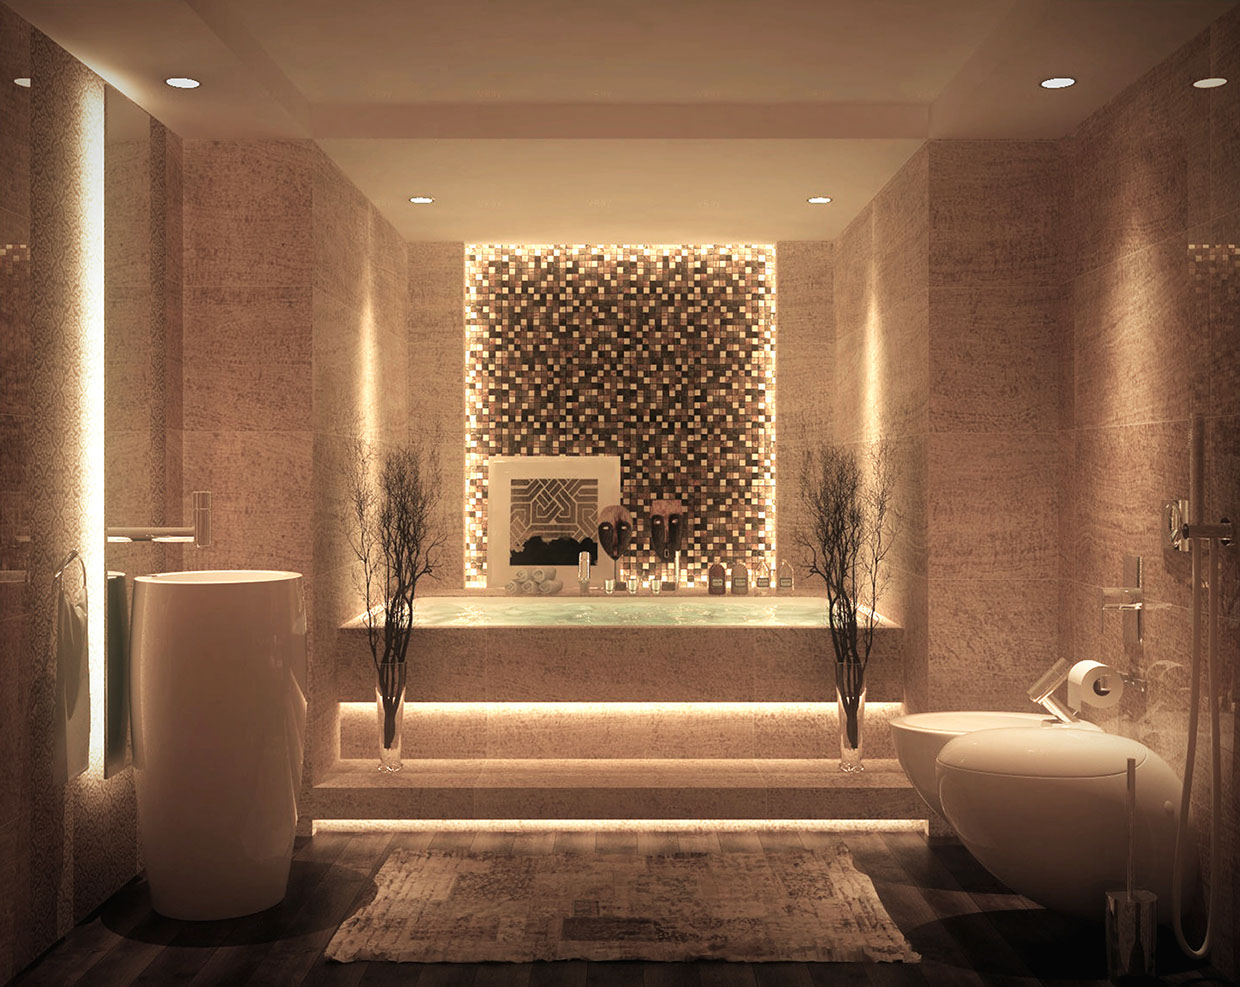 amazing bath tub for bathroom "width =" 1240 "height =" 987 "srcset =" https://mileray.com/wp-content/uploads/2020/05/1588514892_365_Luxurious-Bathroom-Designs-With-Stunning-Decor-Details-Looks-Very-Charming.jpg 1240w, https://mileray.com /wp-content/uploads/2016/08/Ahmed-Mady2-300x239.jpg 300w, https://mileray.com/wp-content/uploads/2016/08/Ahmed-Mady2-768x611.jpg 768w, https: / /mileray.com/wp-content/uploads/2016/08/Ahmed-Mady2-1024x815.jpg 1024w, https://mileray.com/wp-content/uploads/2016/08/Ahmed-Mady2-696x554.jpg 696w , https://mileray.com/wp-content/uploads/2016/08/Ahmed-Mady2-1068x850.jpg 1068w, https://mileray.com/wp-content/uploads/2016/08/Ahmed-Mady2- 528x420.jpg 528w "sizes =" (maximum width: 1240px) 100vw, 1240px